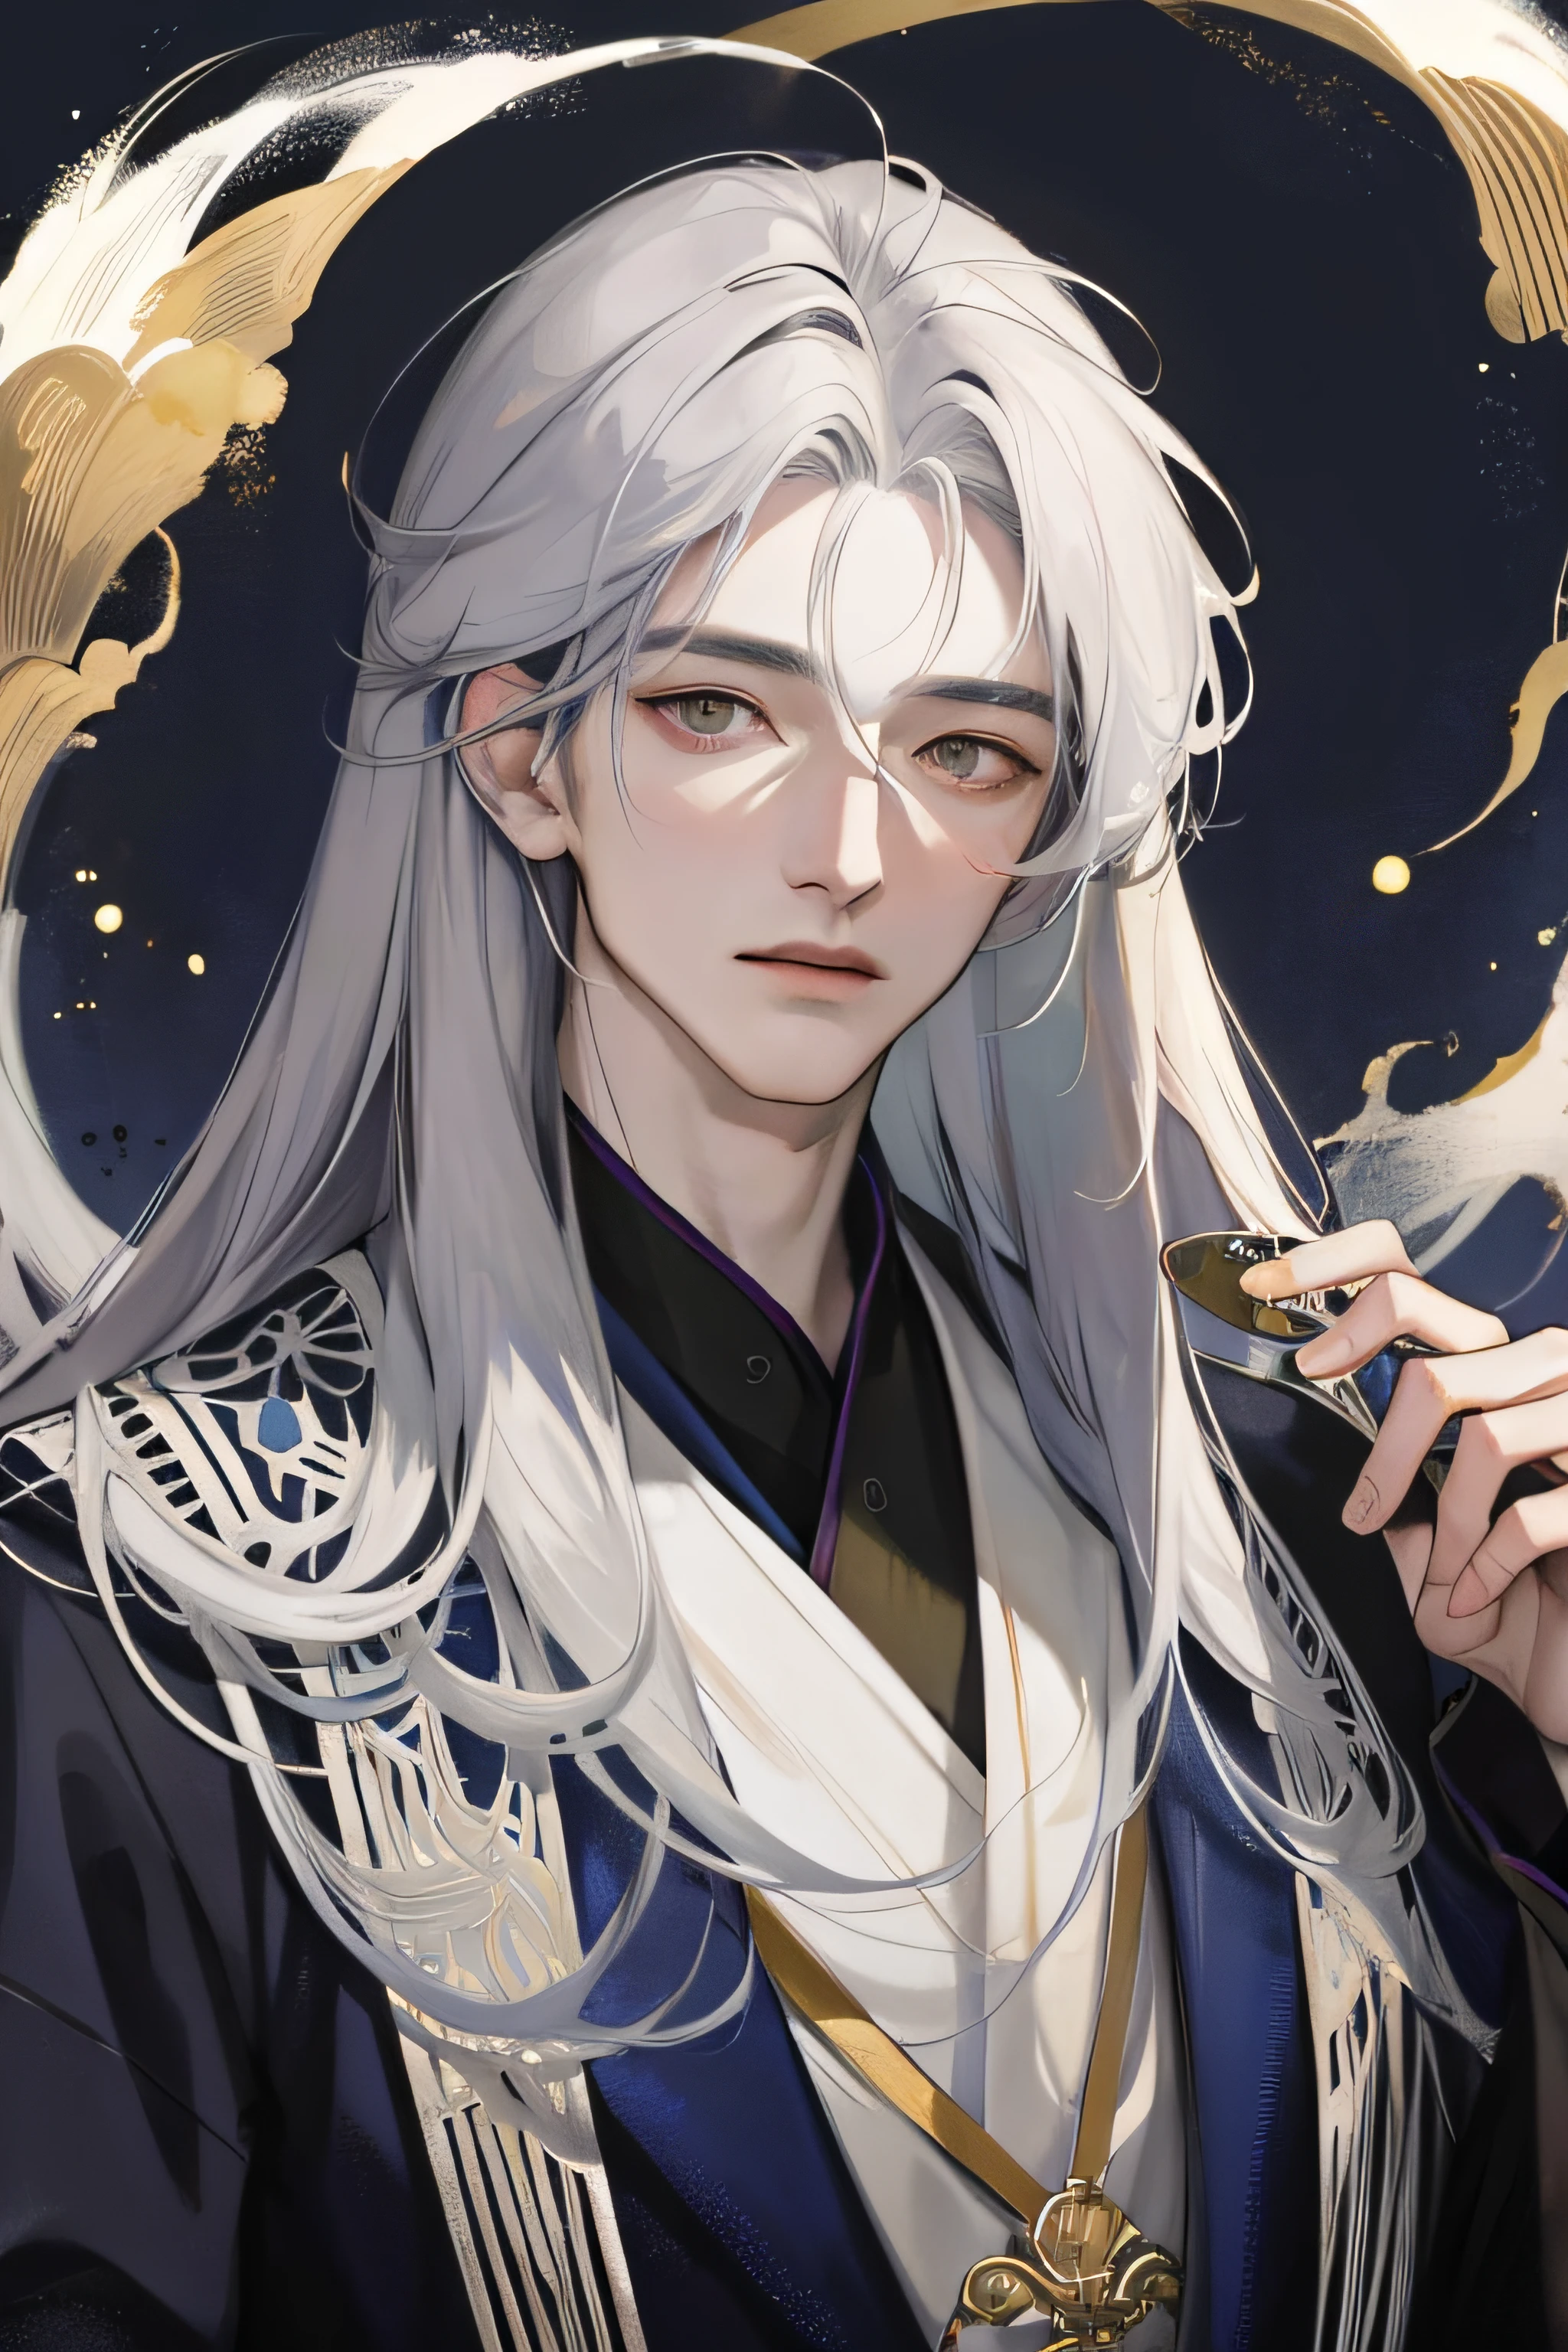 Masterpiece, Best quality, Night, full moon,Exquisite facial details， 1 man, Mature man, Chinese style, fox ear，Ancient China, Gray hair like spring, Golden eyes, Split ends of hair, Long hair, Long bangs, Handsome, Handsome, Masculine, gentle, Tall, calm, Mixed white and blue clothing, Dark background, fox tails，Fox element,  in wonderland